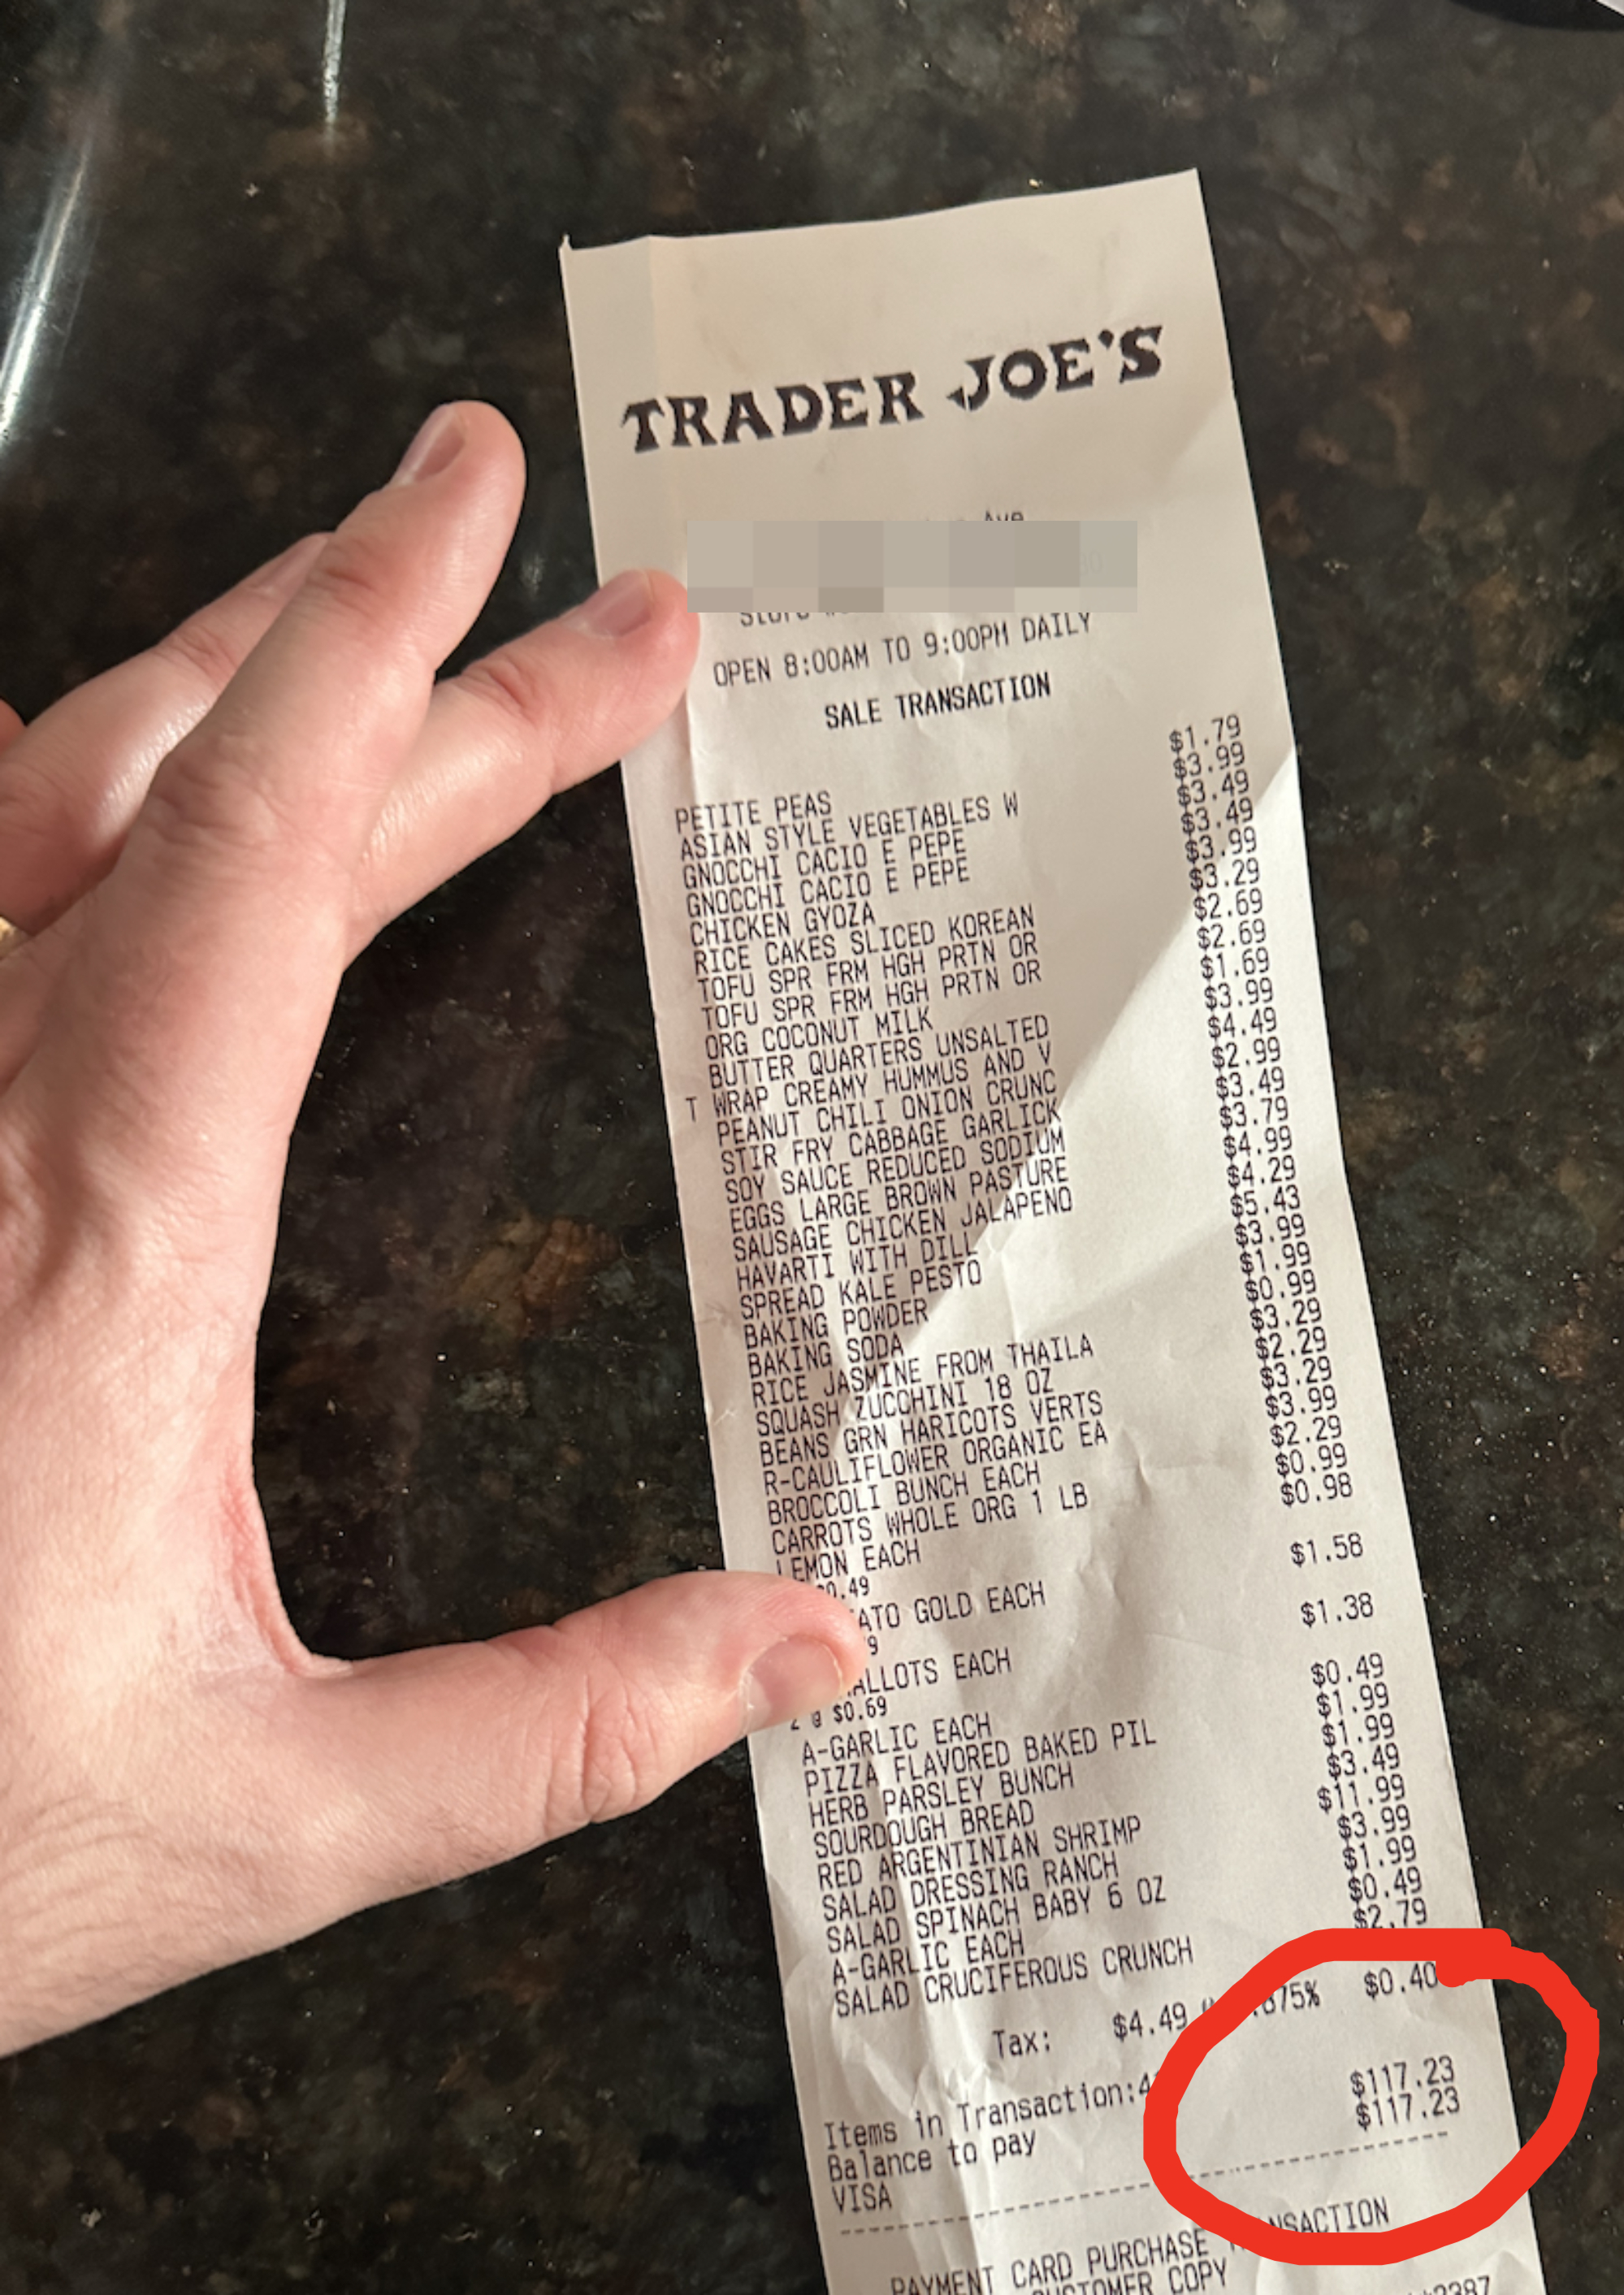 Hand holding a Trader Joe&#x27;s receipt listing various grocery items and their prices, with a total of $117.43 at the bottom